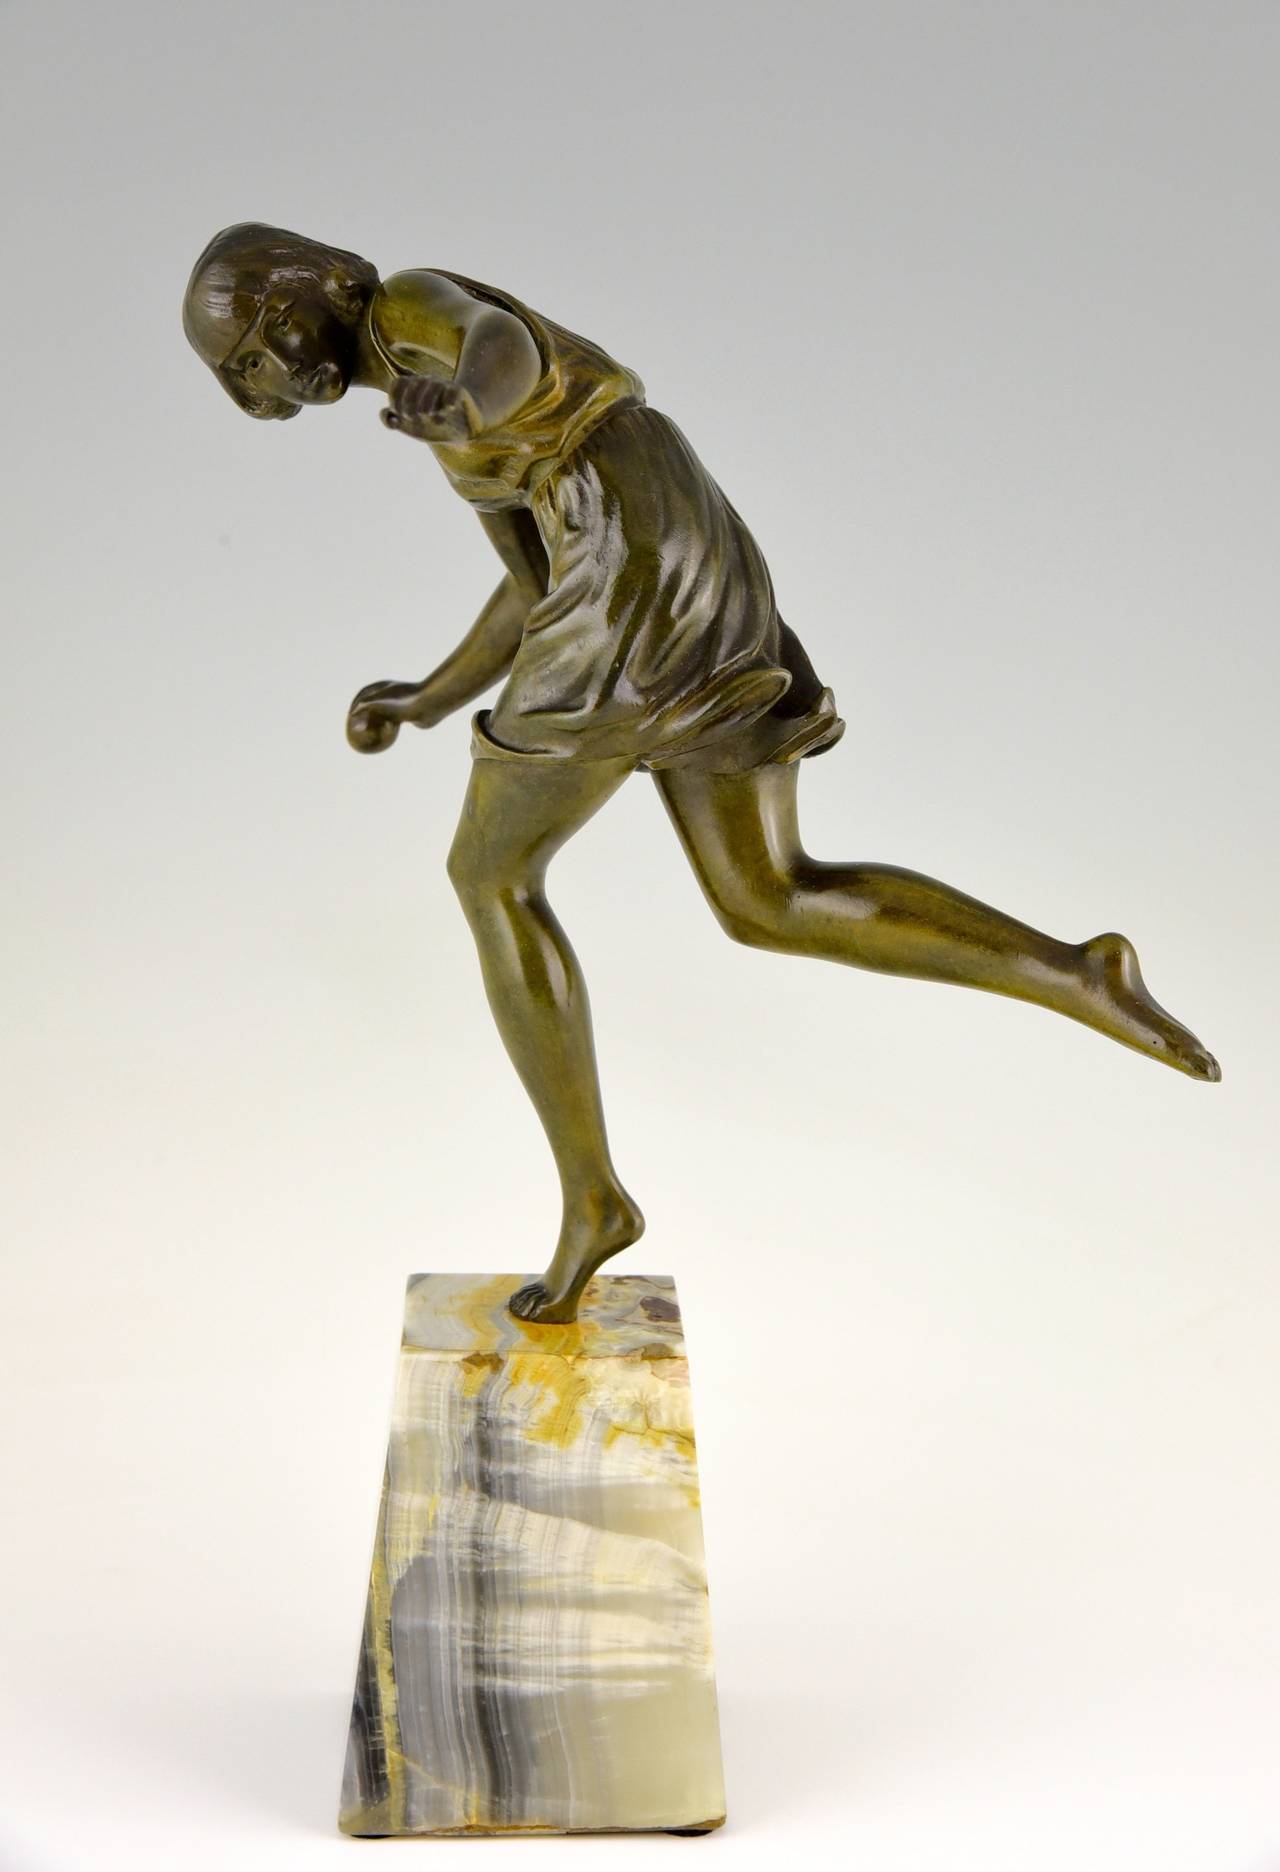 20th Century Art Deco Bronze Sculpture of a Girl with Ball by Pierre Le Faguays, 1922      